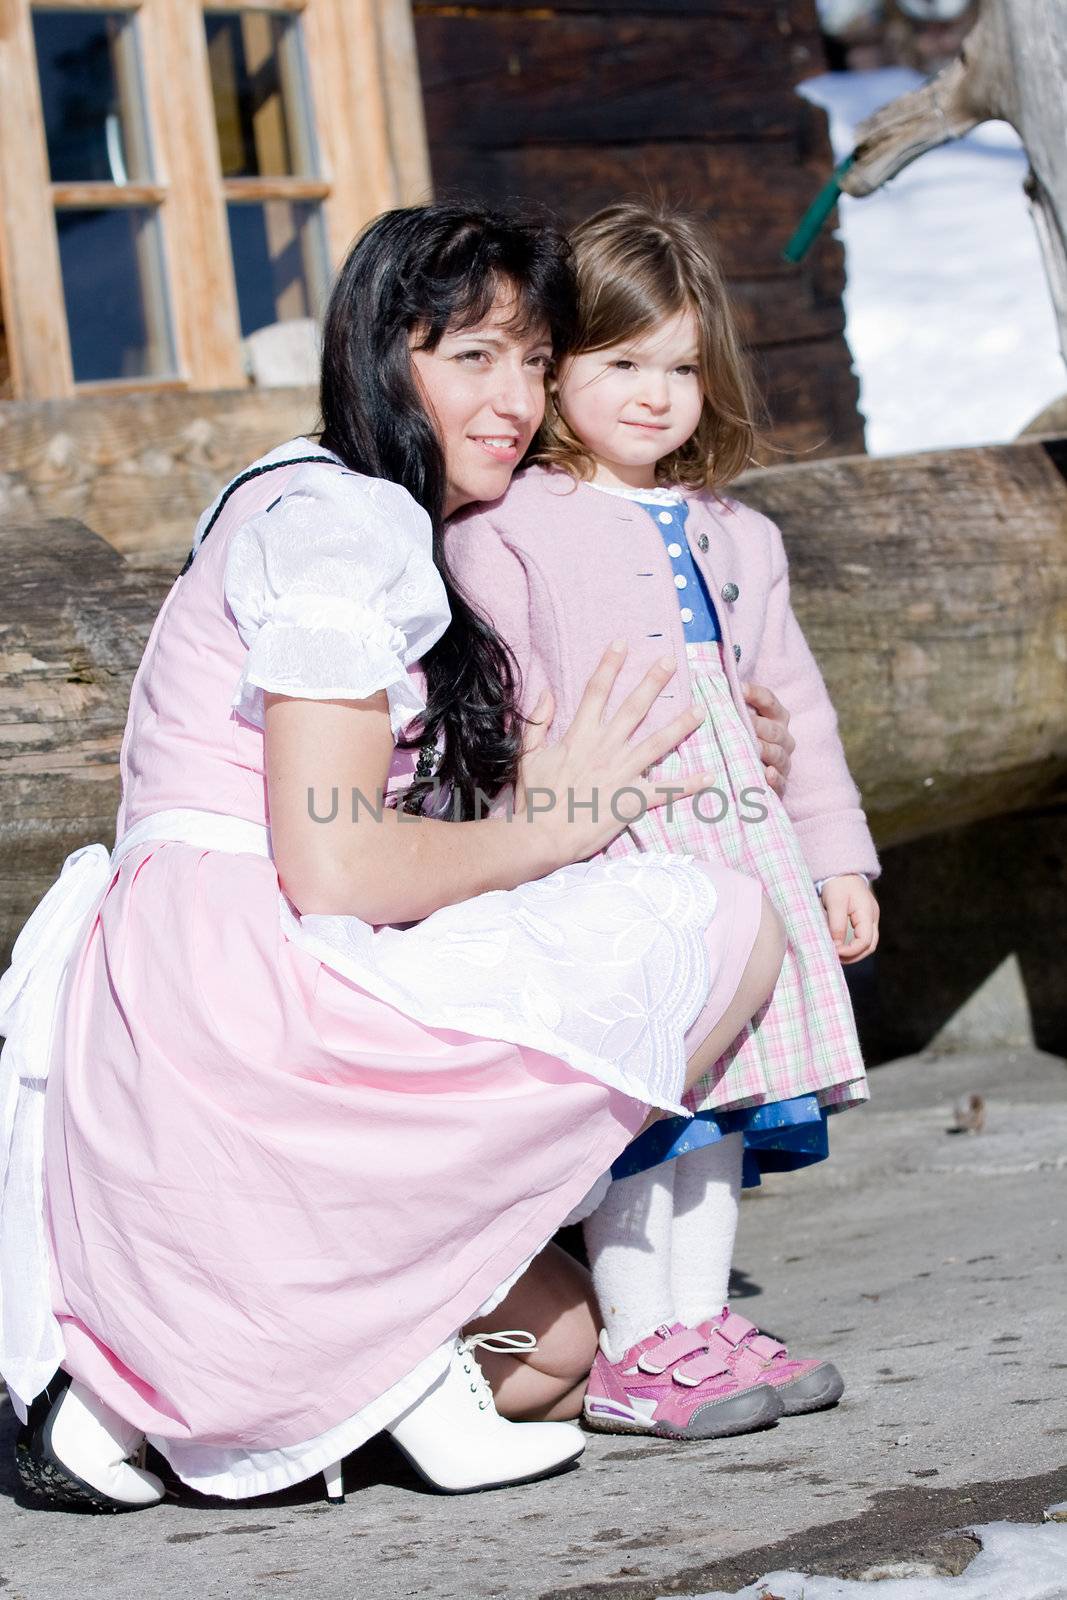 Mother and infant in costume stands in front of a cabin in the mountains